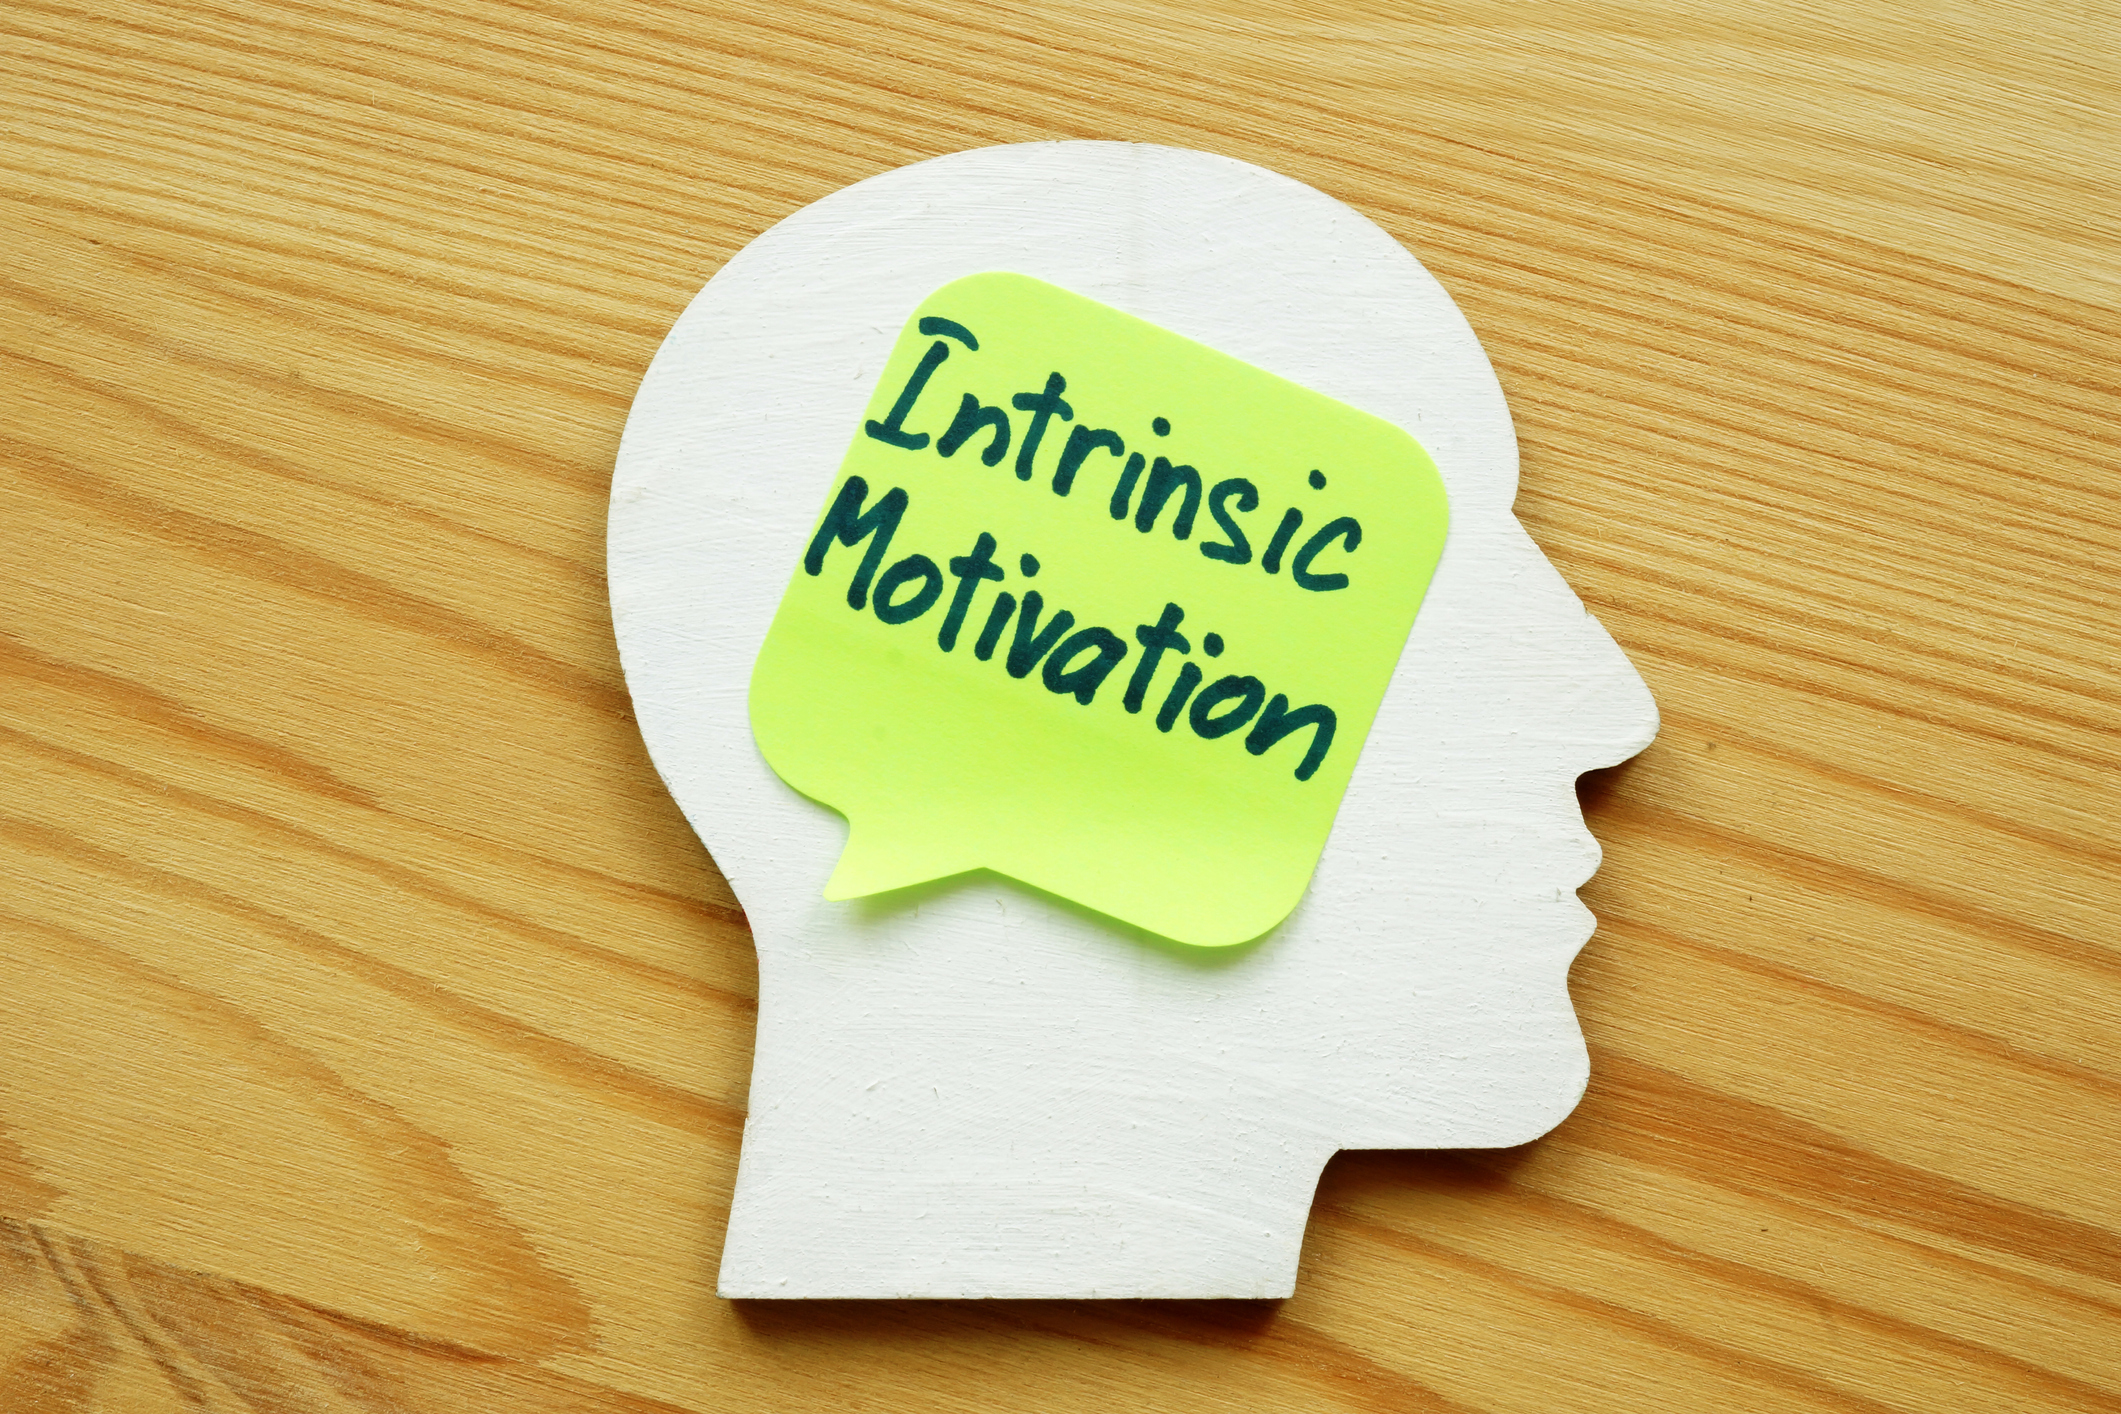 A leader motivates their team with intrinsic motivation.